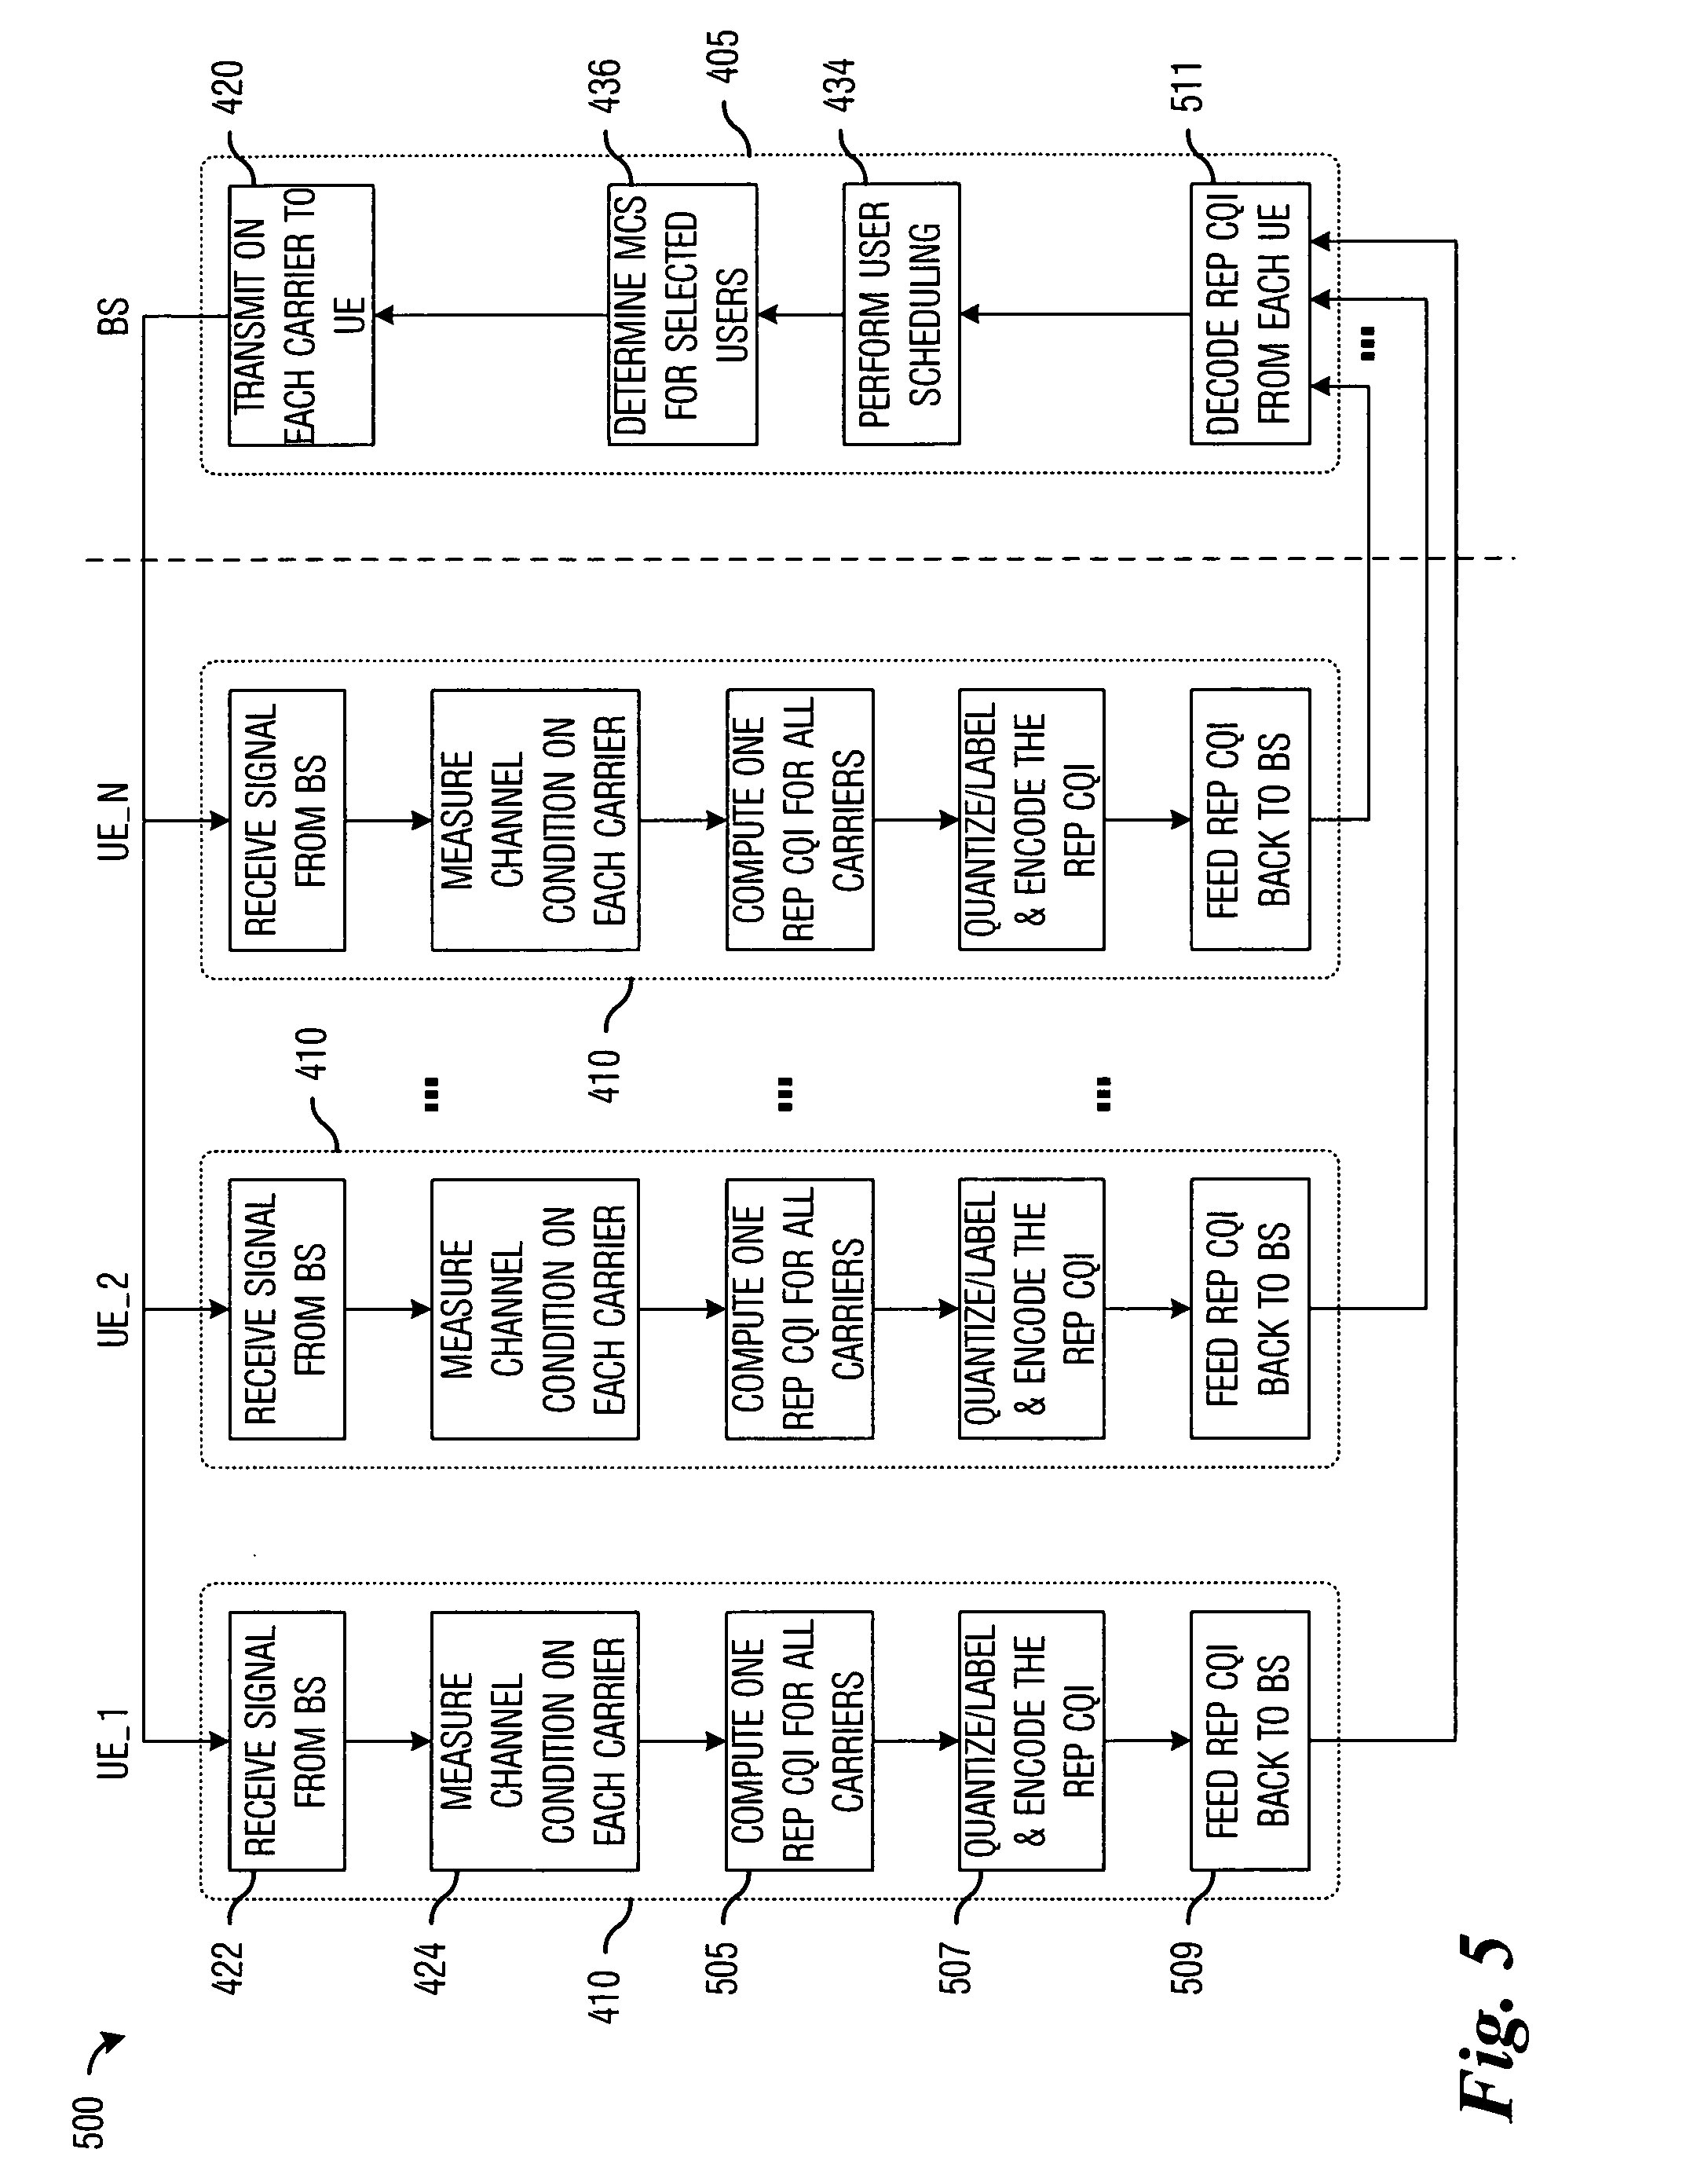 Method for channel quality indicator computation and feedback in a multi-carrier communications system